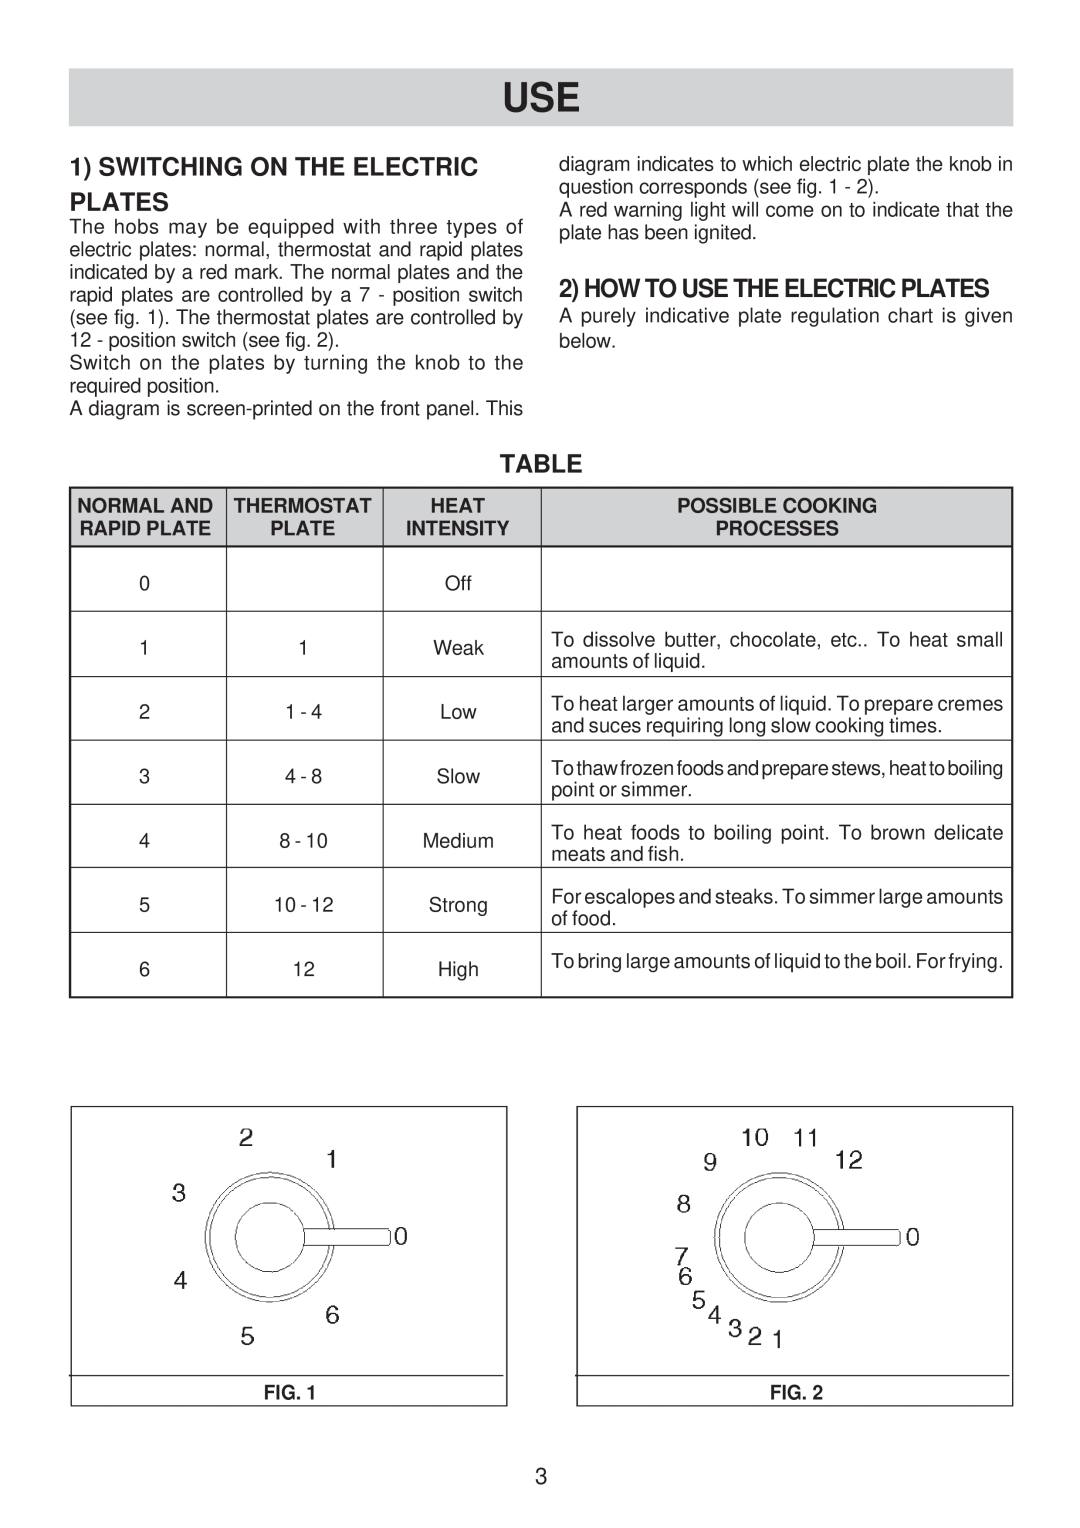 Smeg SE435XT Switching On The Electric Plates, How To Use The Electric Plates, Normal And, Thermostat, Heat, Rapid Plate 